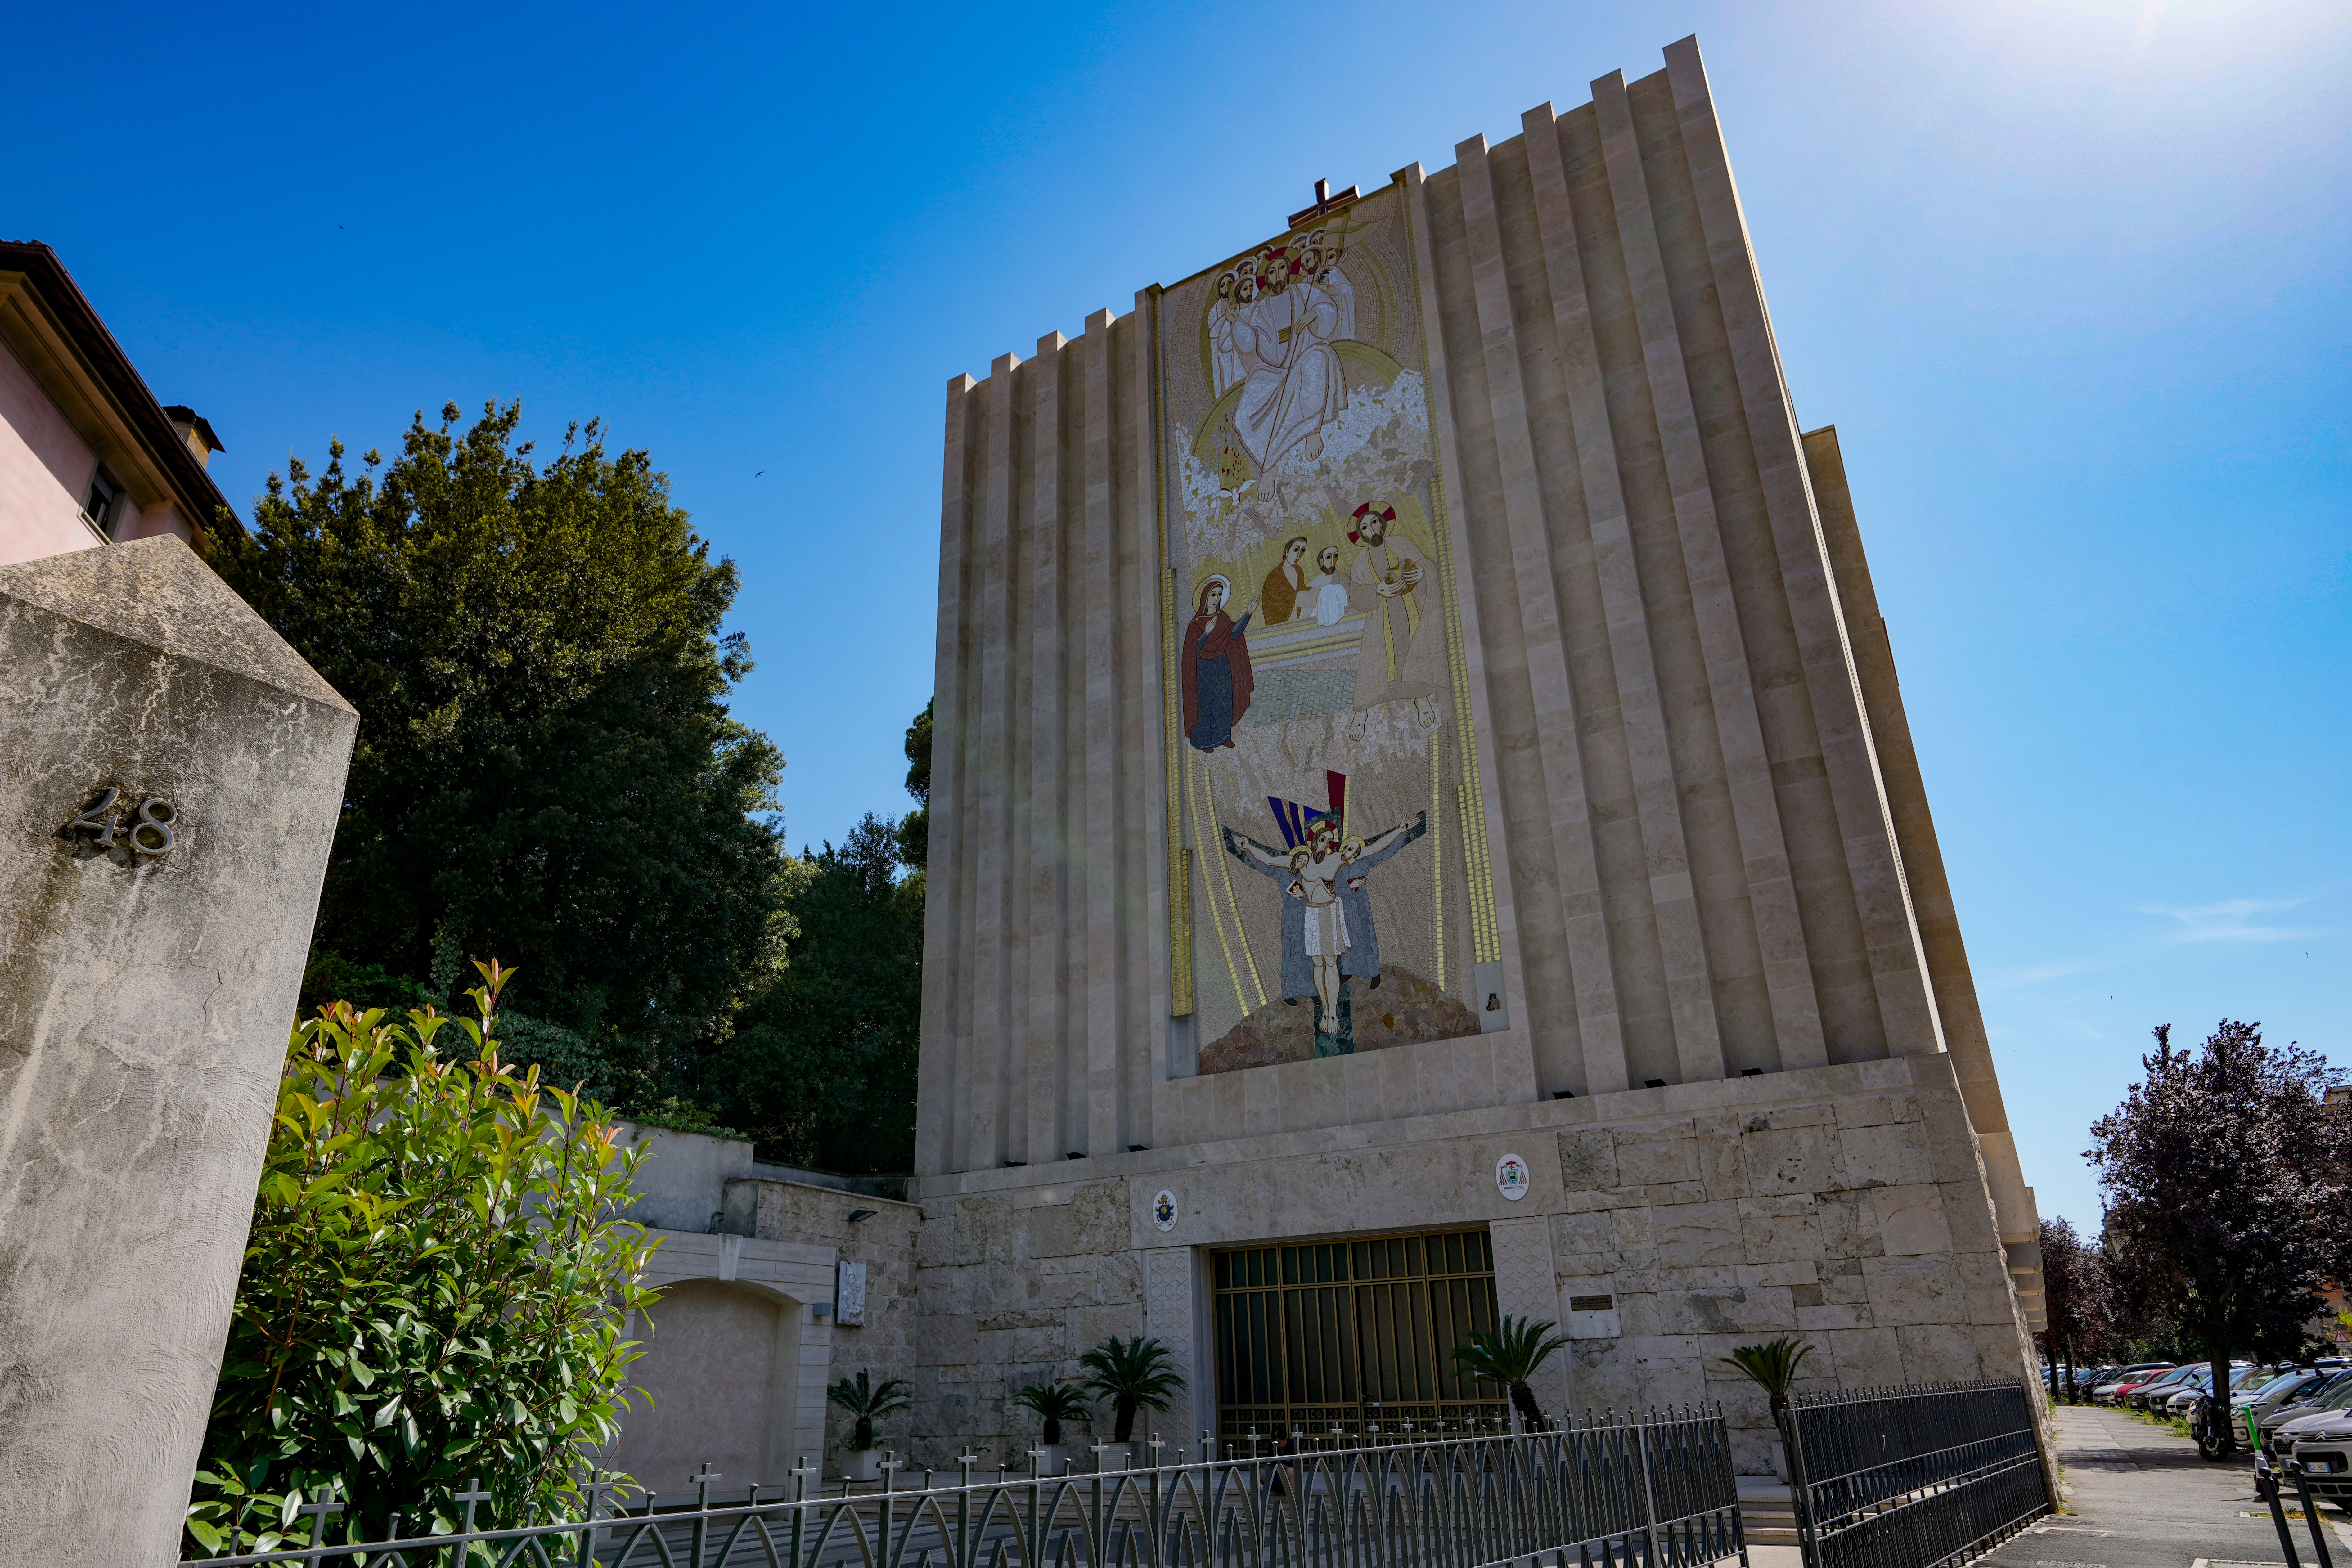 A mosaic by ex-Jesuit artist Marko Rupnik is seen on the main facade of the Church of Our Lady of the Canadian Martyrs